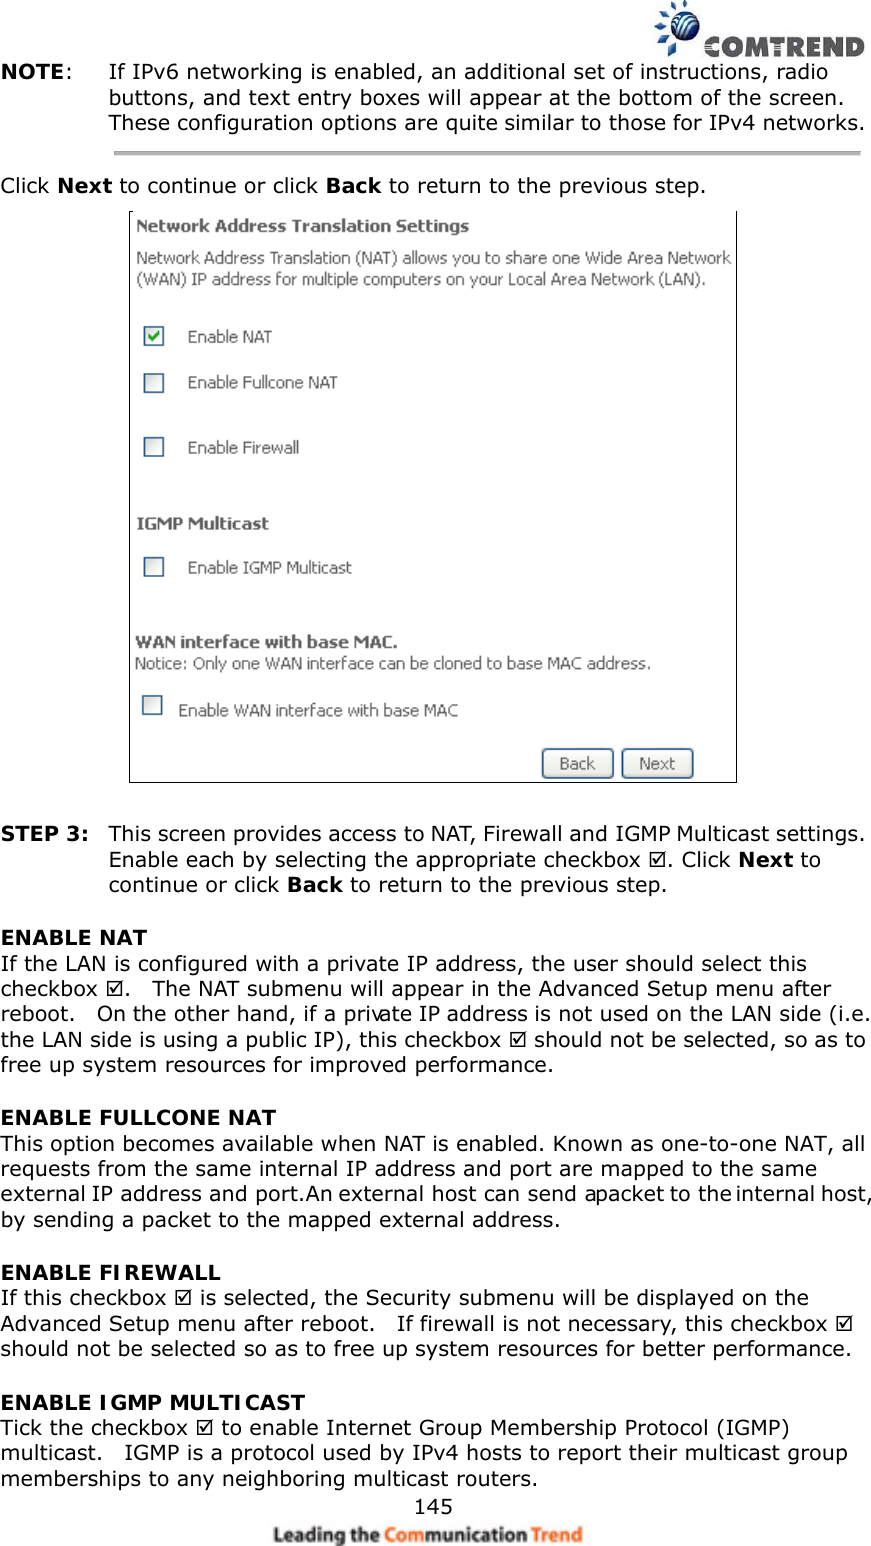    145NOTE:  If IPv6 networking is enabled, an additional set of instructions, radio buttons, and text entry boxes will appear at the bottom of the screen.   These configuration options are quite similar to those for IPv4 networks. Click Next to continue or click Back to return to the previous step.   STEP 3:  This screen provides access to NAT, Firewall and IGMP Multicast settings. Enable each by selecting the appropriate checkbox . Click Next to continue or click Back to return to the previous step. ENABLE NAT If the LAN is configured with a private IP address, the user should select this checkbox .    The NAT submenu will appear in the Advanced Setup menu after reboot.    On the other hand, if a private IP address is not used on the LAN side (i.e. the LAN side is using a public IP), this checkbox  should not be selected, so as to free up system resources for improved performance. ENABLE FULLCONE NAT   This option becomes available when NAT is enabled. Known as one-to-one NAT, all requests from the same internal IP address and port are mapped to the same external IP address and port. An external host can send a packet to the internal host, by sending a packet to the mapped external address. ENABLE FIREWALL If this checkbox  is selected, the Security submenu will be displayed on the Advanced Setup menu after reboot.    If firewall is not necessary, this checkbox  should not be selected so as to free up system resources for better performance.     ENABLE IGMP MULTICAST Tick the checkbox  to enable Internet Group Membership Protocol (IGMP) multicast.    IGMP is a protocol used by IPv4 hosts to report their multicast group memberships to any neighboring multicast routers.   